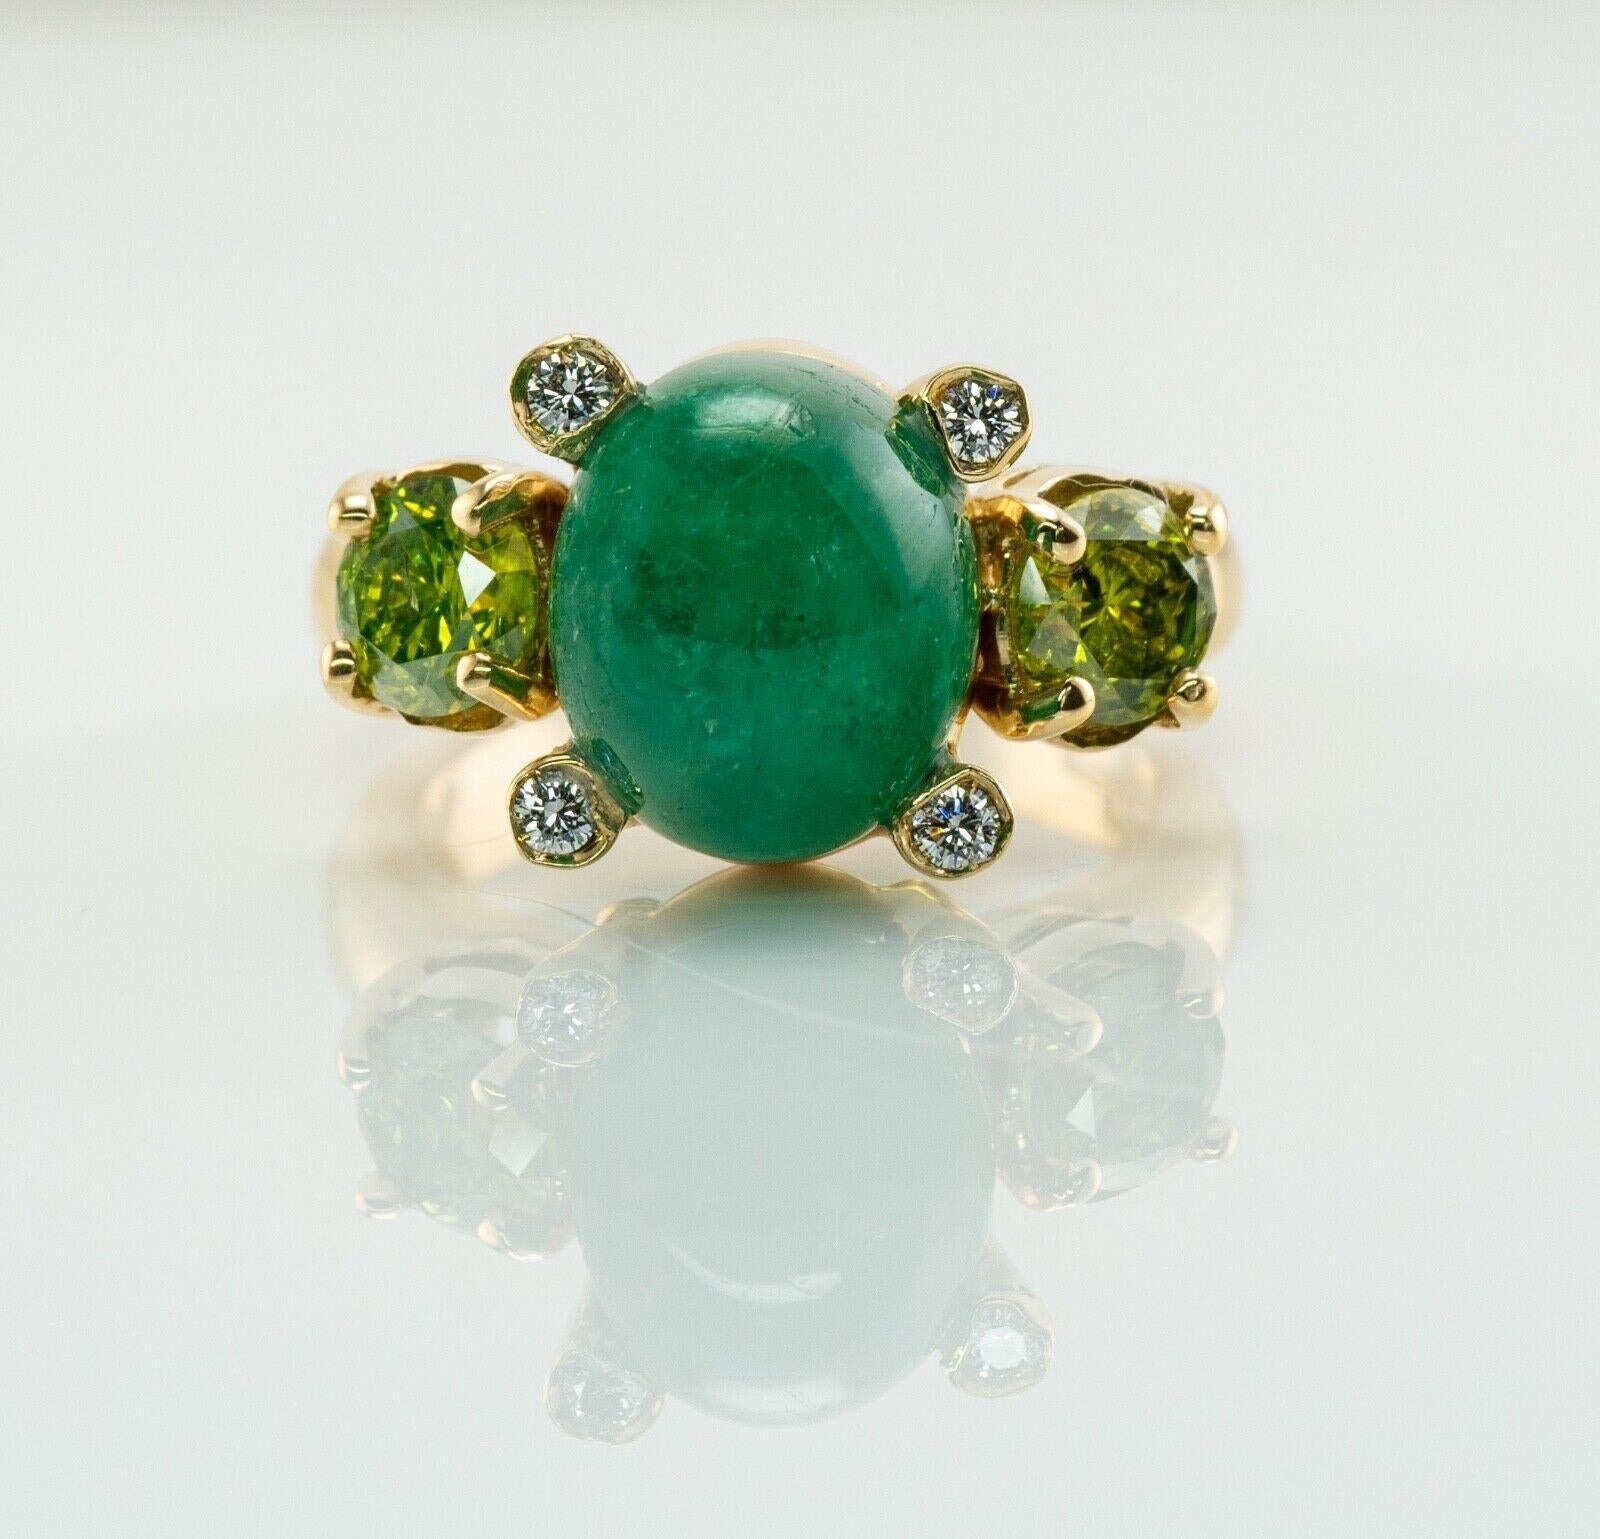 This gorgeous vintage ring is finely crafted in solid 18K Yellow Gold, made in Italy. The center Emerald cabochon is 11x9mm (3.75 carats). This gem has some minor signs of wear which cannot be seen without magnification. Two natural fancy canary